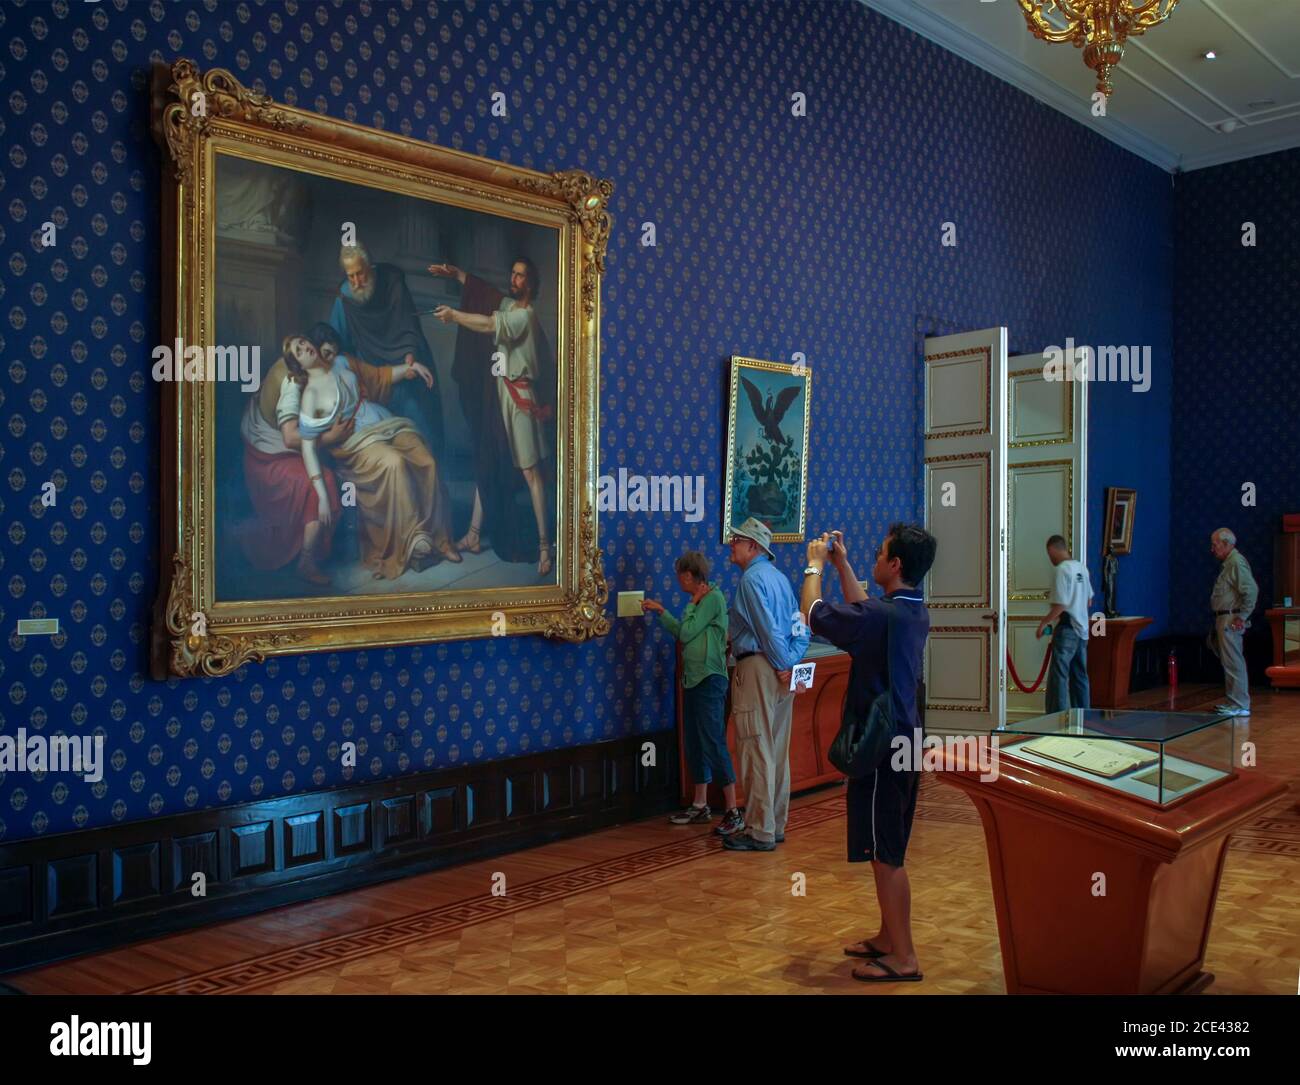 People viewing paintings in the National Palace, Mexico City, Mexico Stock Photo